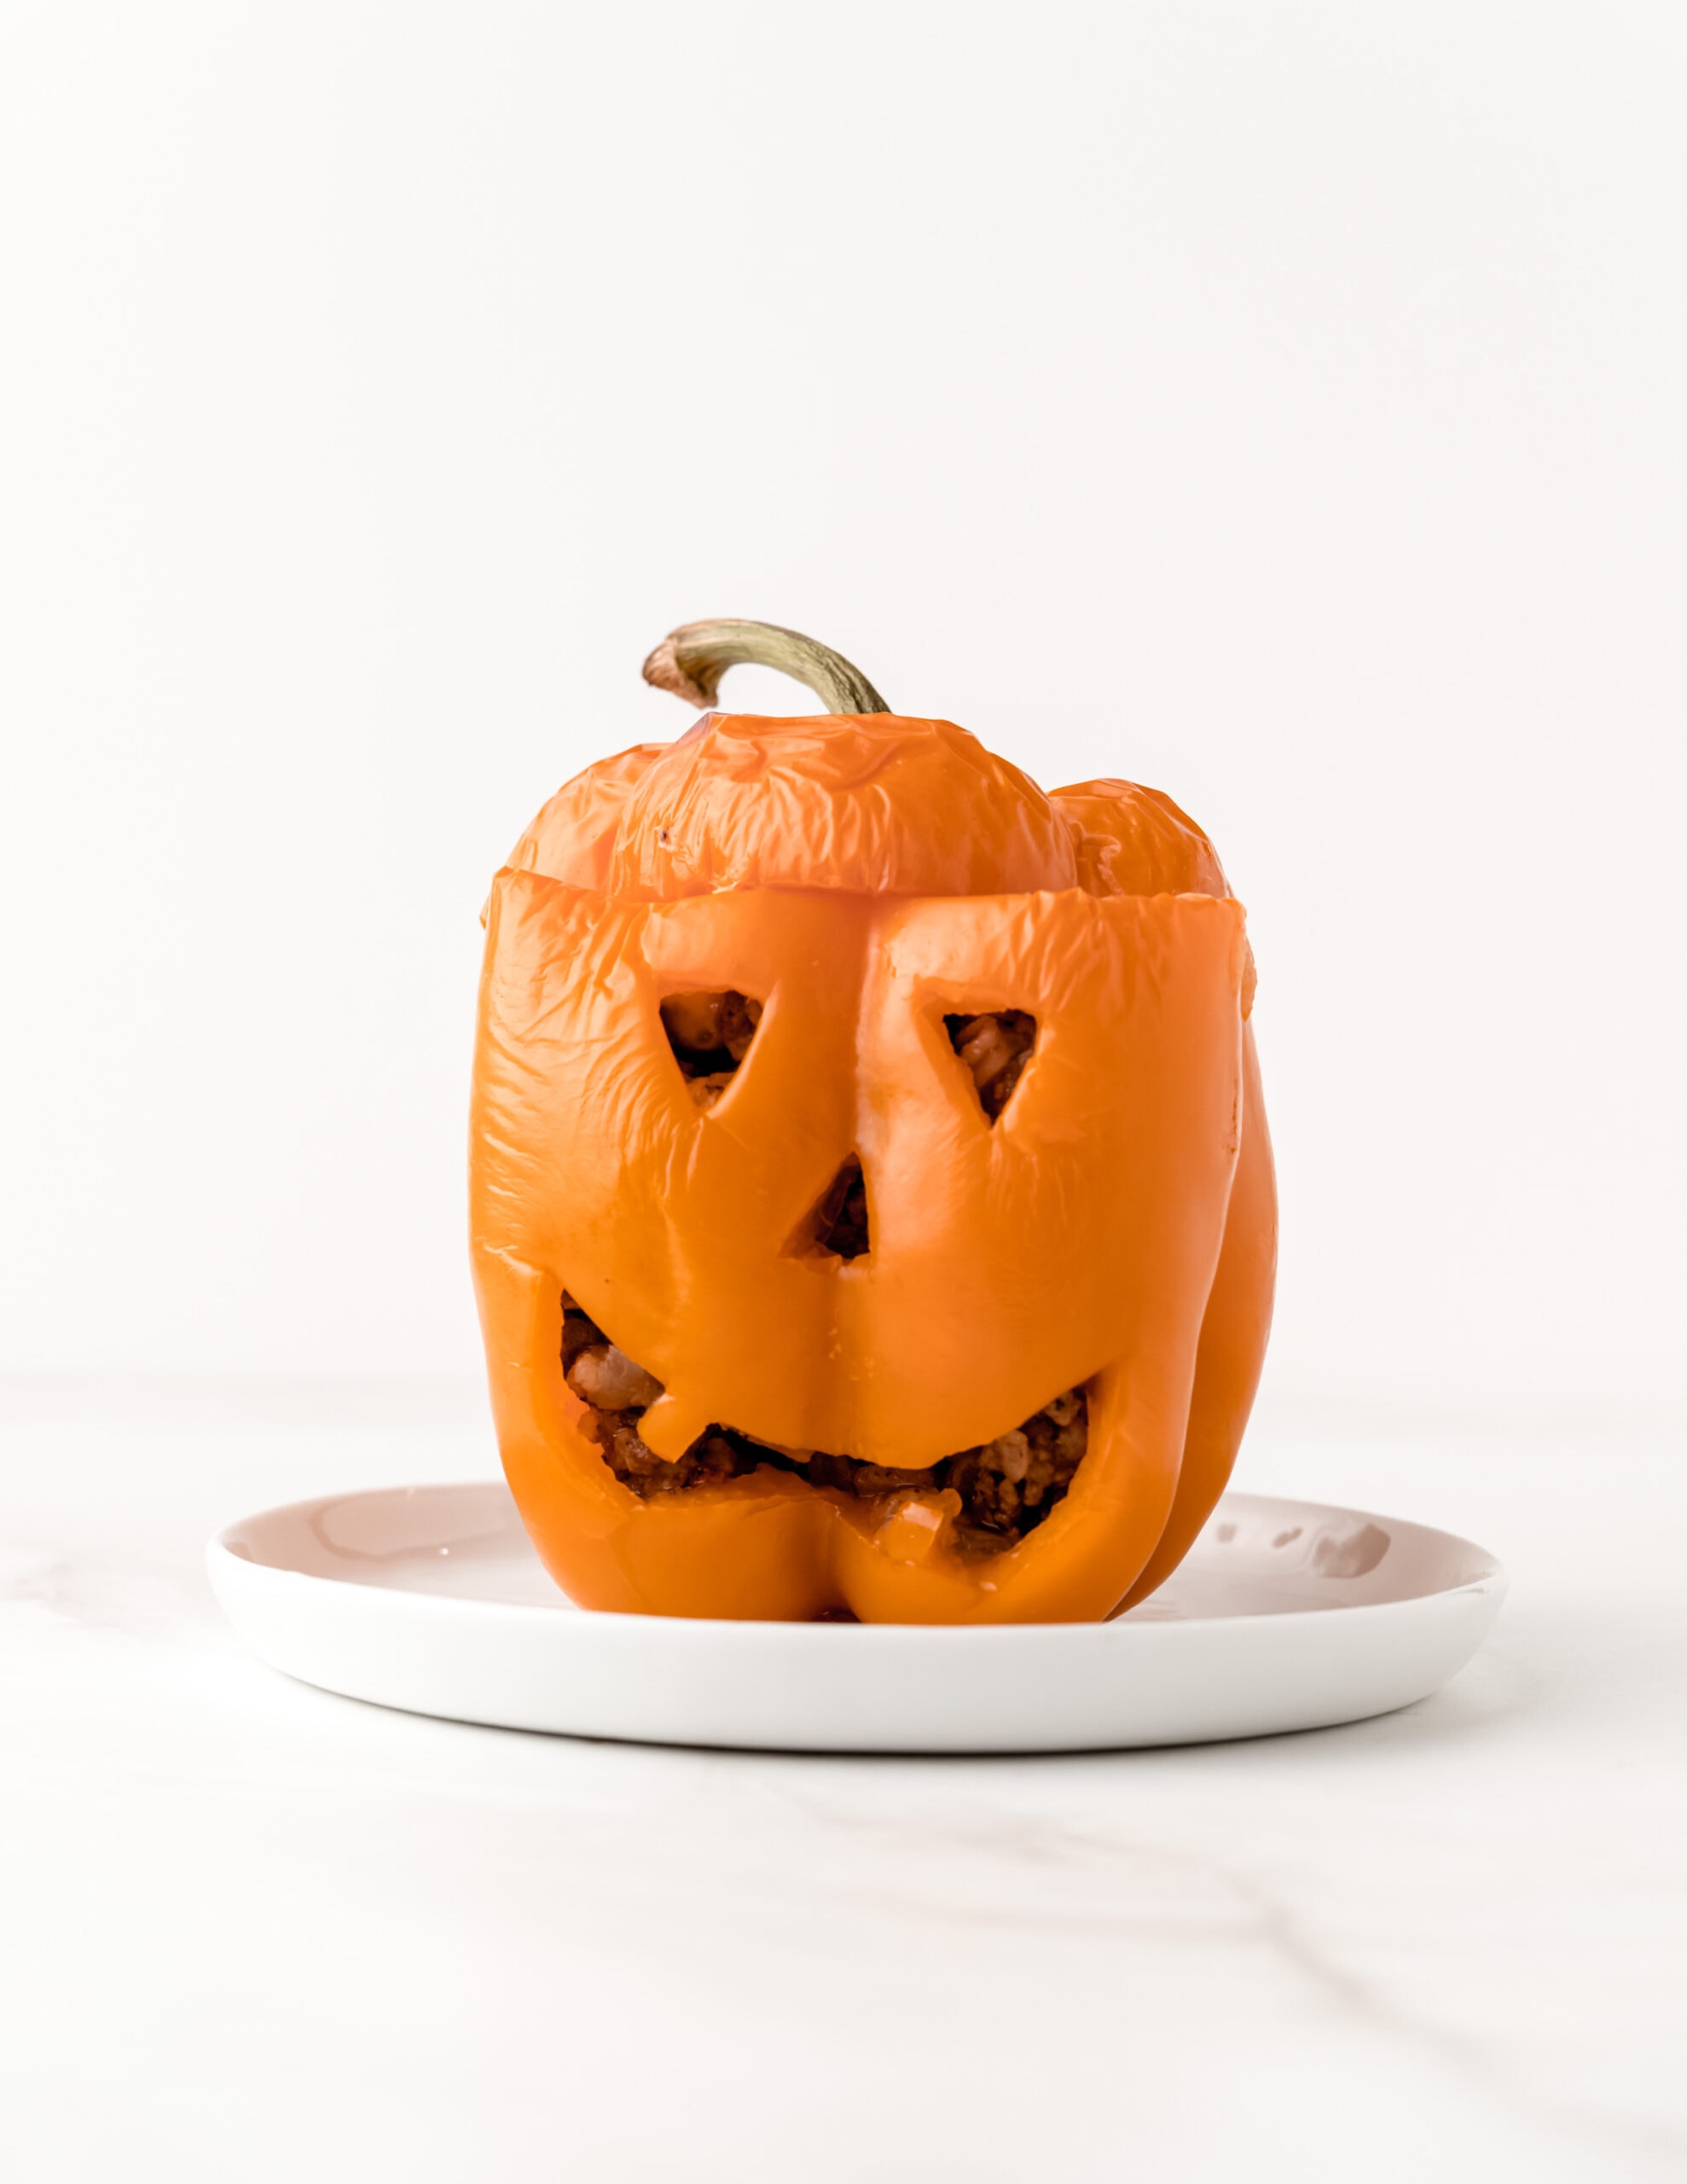 A picture of a gluten-free orange stuffed pepper with a jack-o-lantern face on a white plate.